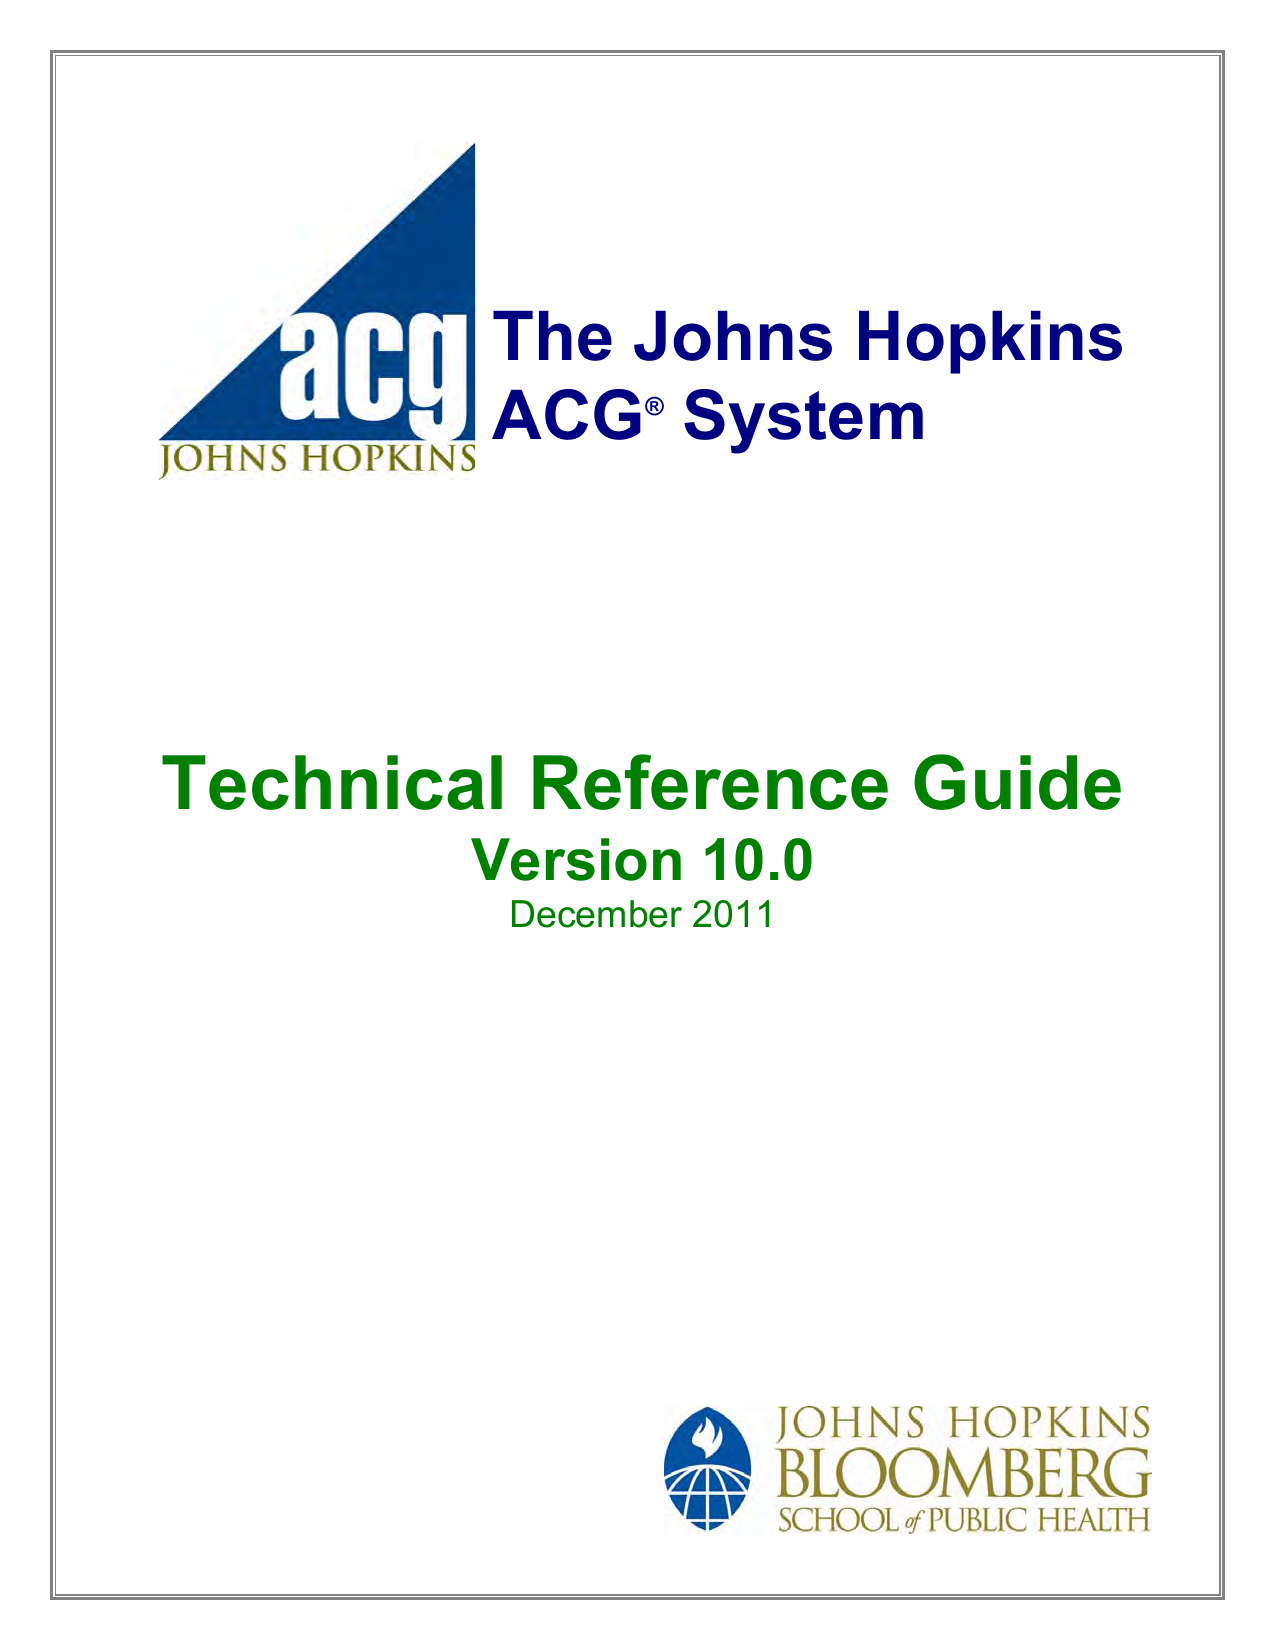 The Johns Hopkins Acg System Technical Reference Guide